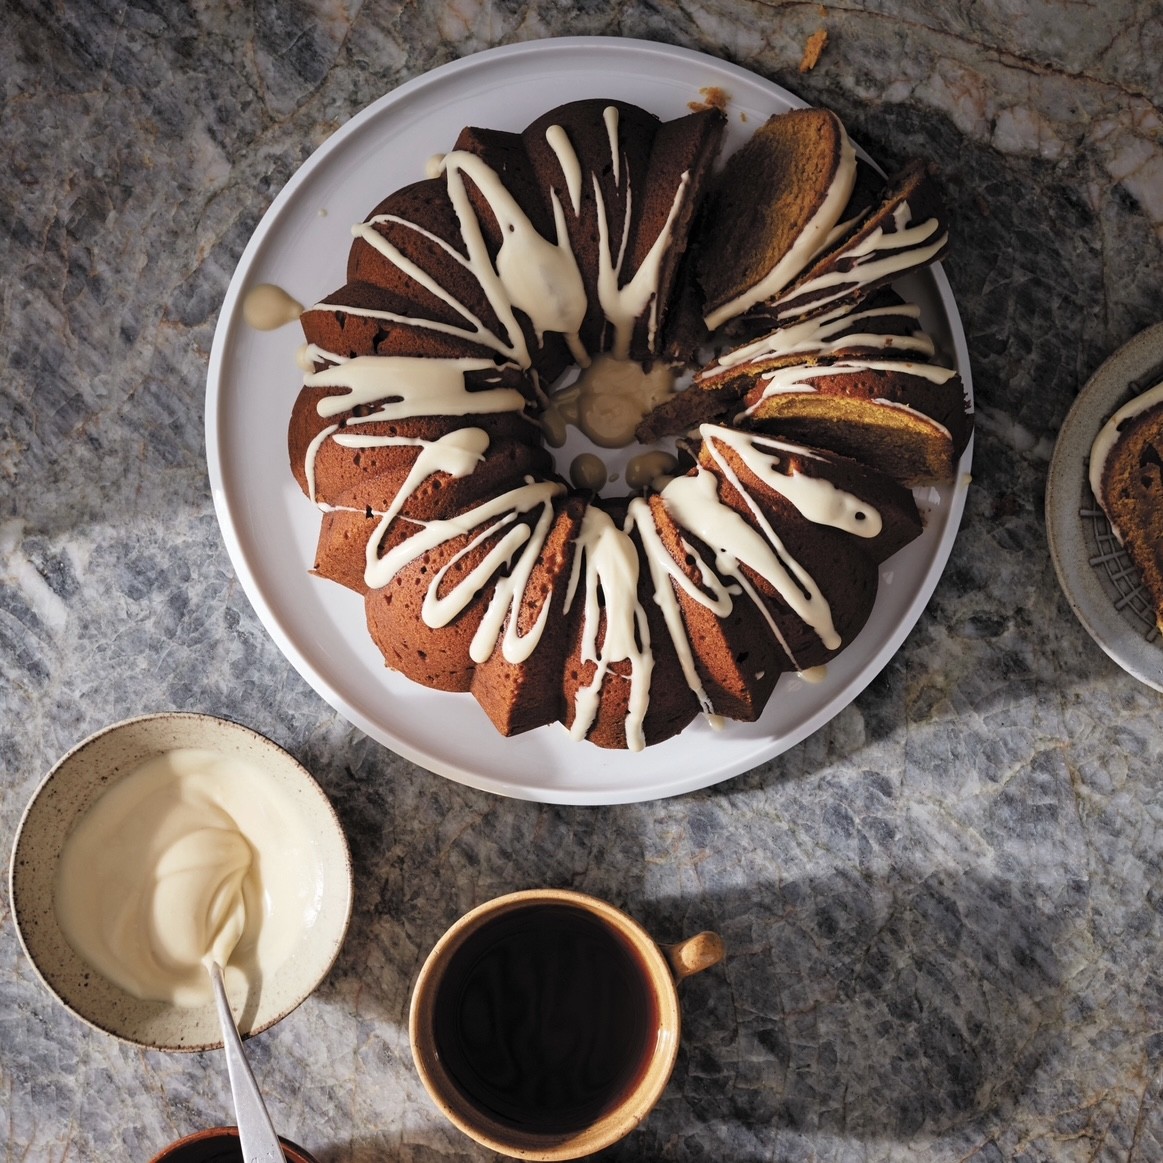 Making a Bundt Pan - MY FAVORITE POTTERY GIFT TO GIVE!! FREE RECIPE!! 